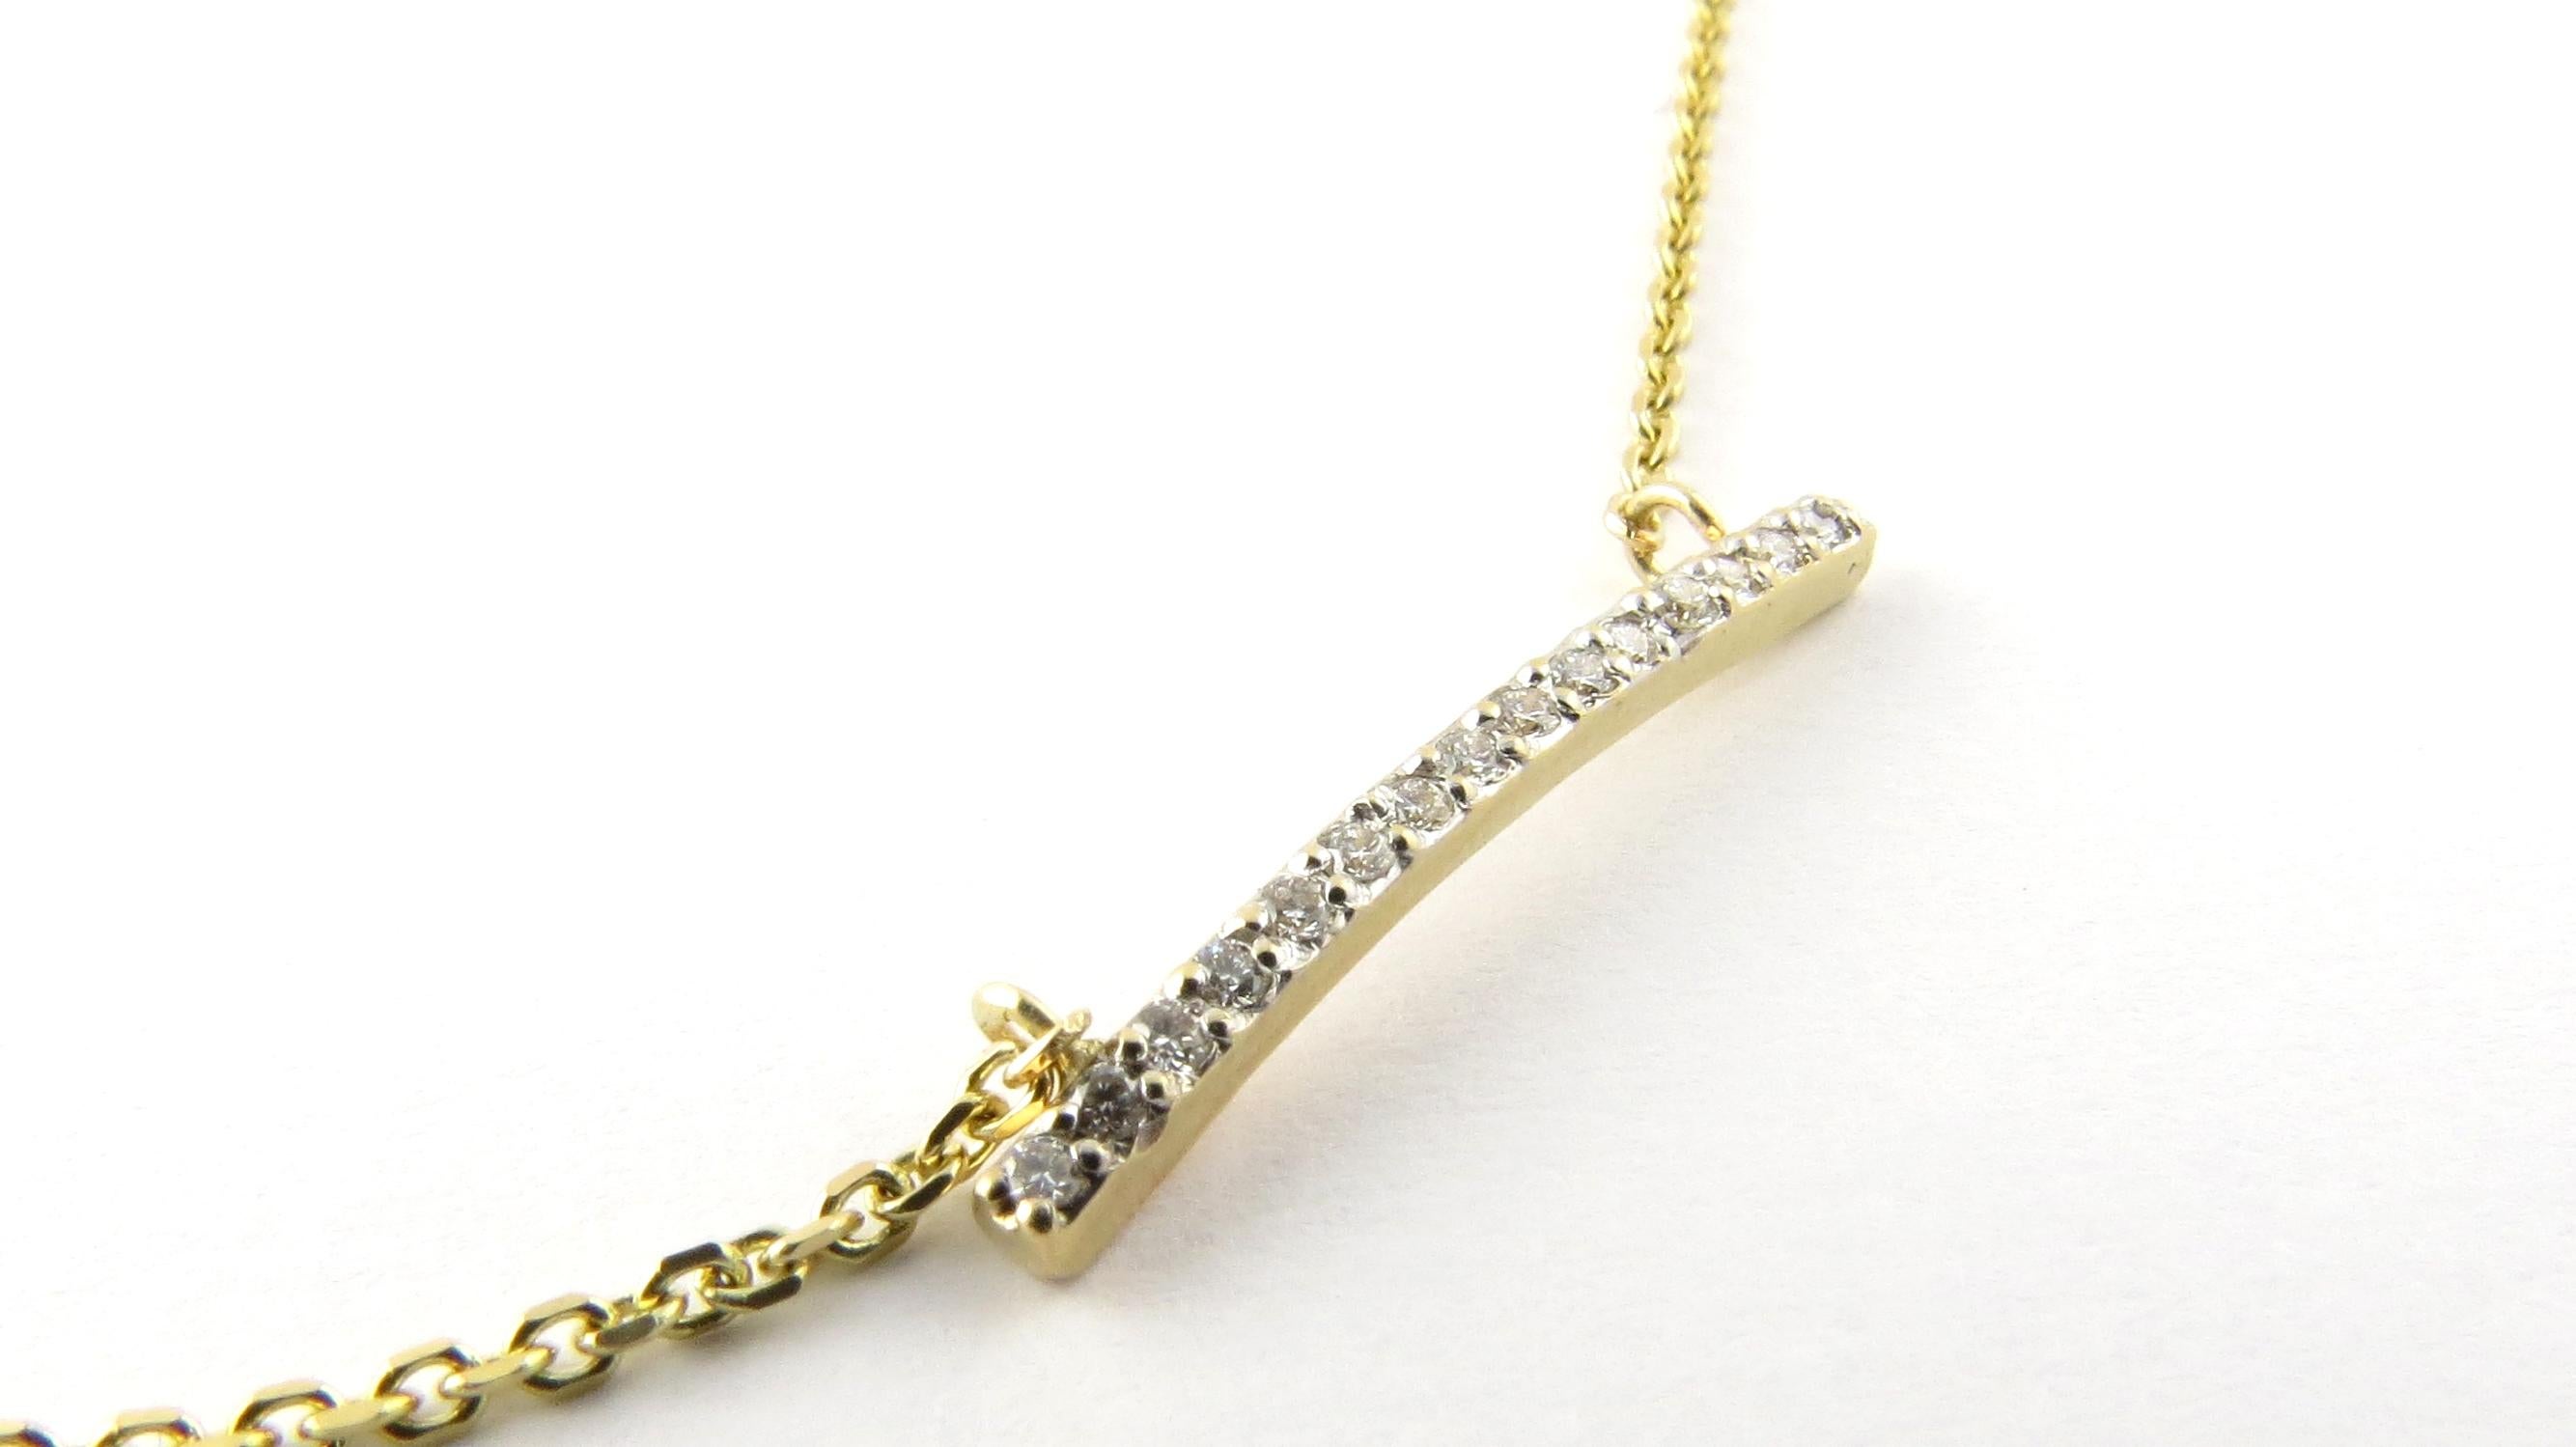 Vintage 14 Karat Yellow Gold Diamond Bar Necklace #16315 In Good Condition For Sale In Washington Depot, CT